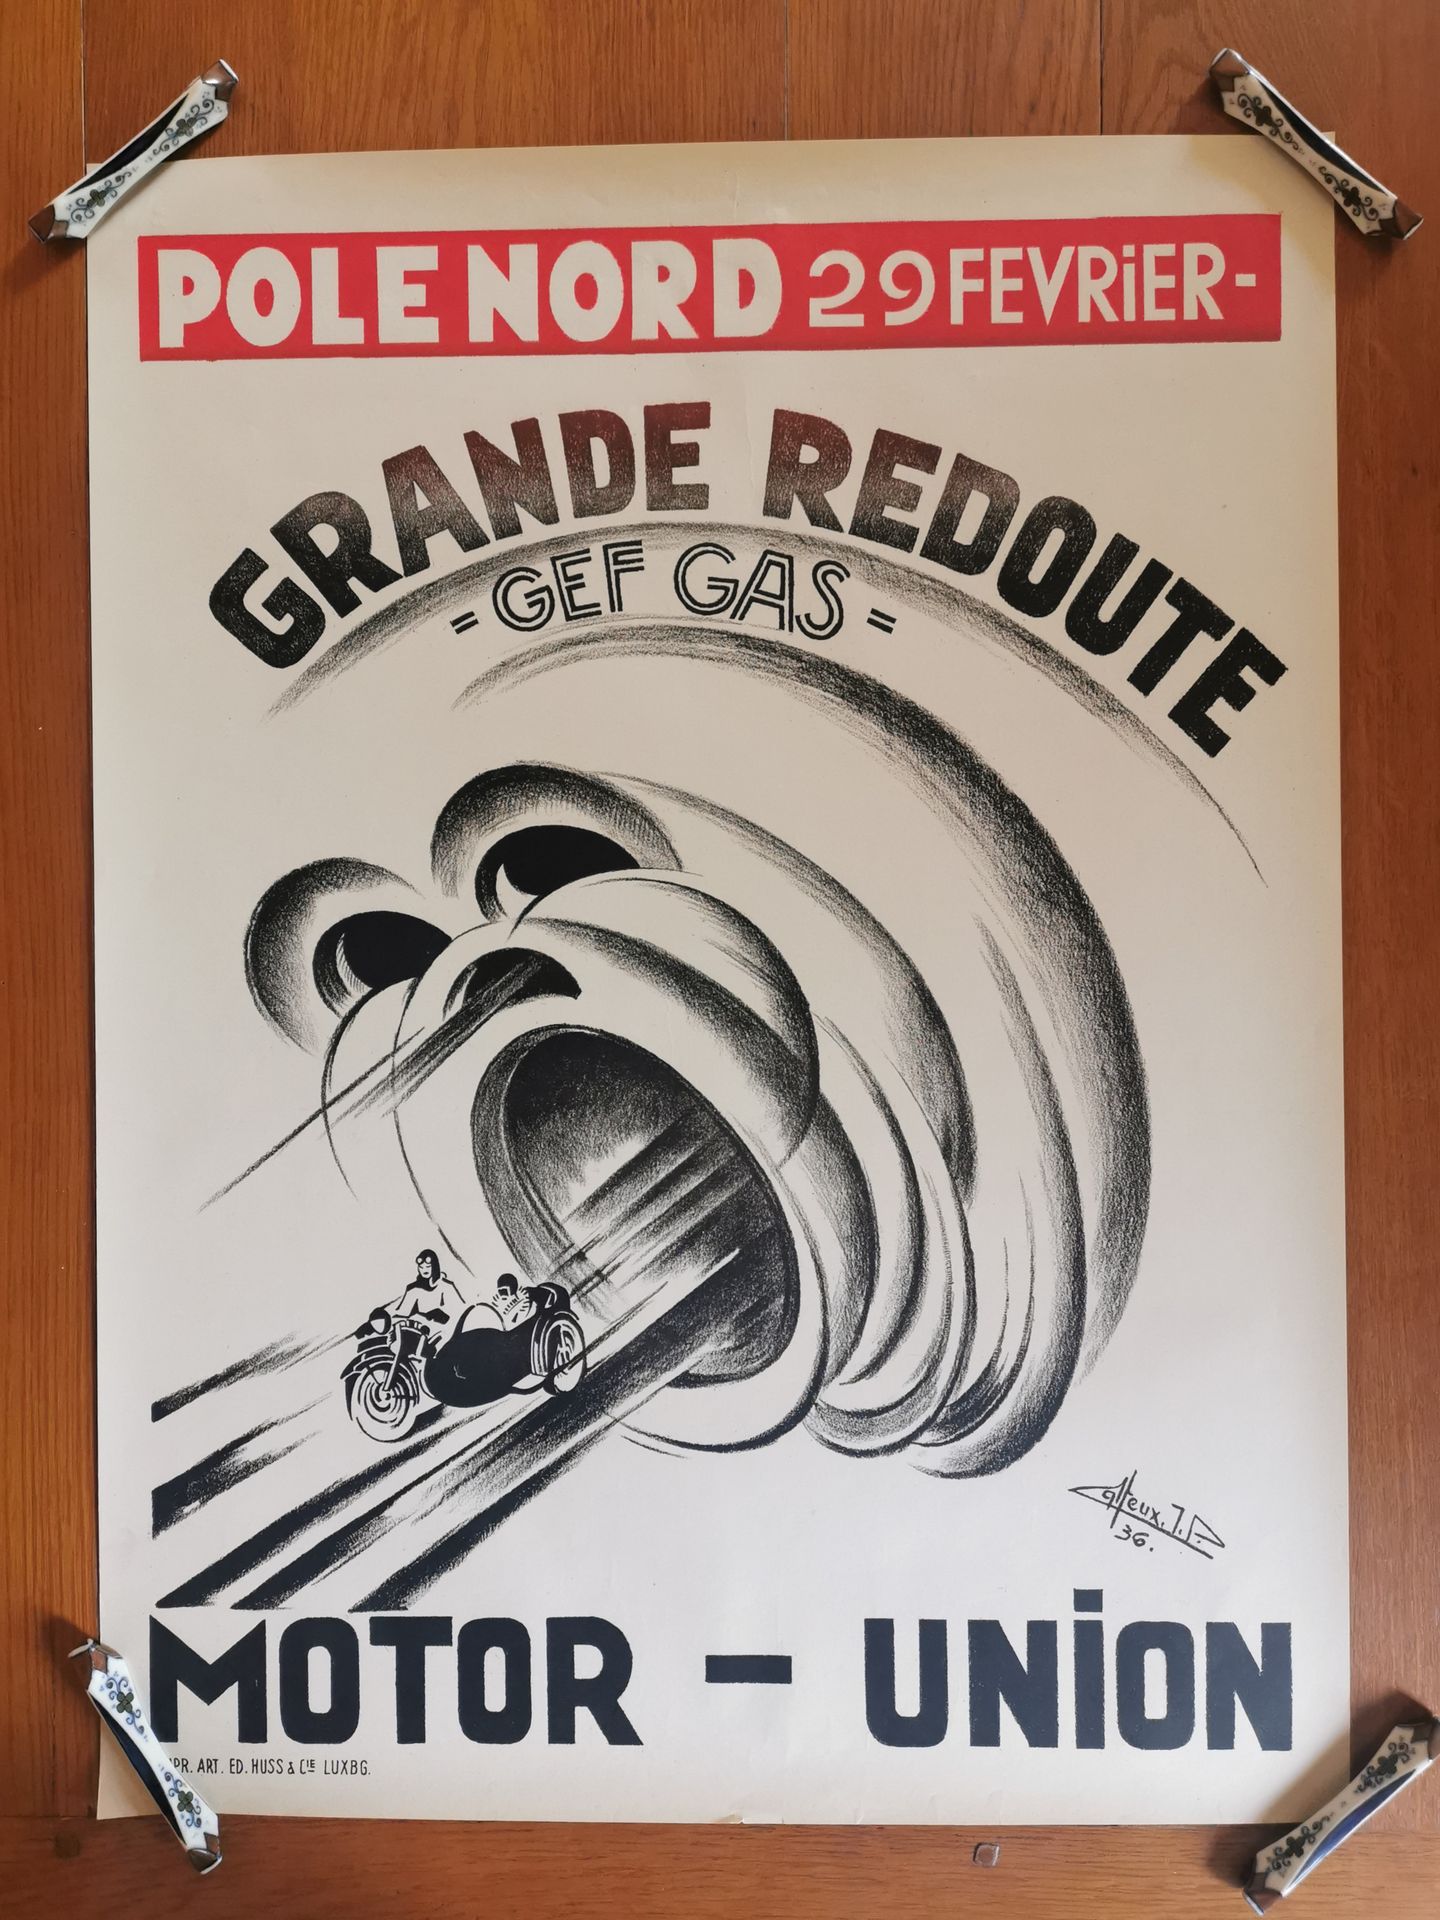 Null (POSTER) Exceptional two-colour poster of the GEF-GAZ Grande Redoute at the&hellip;